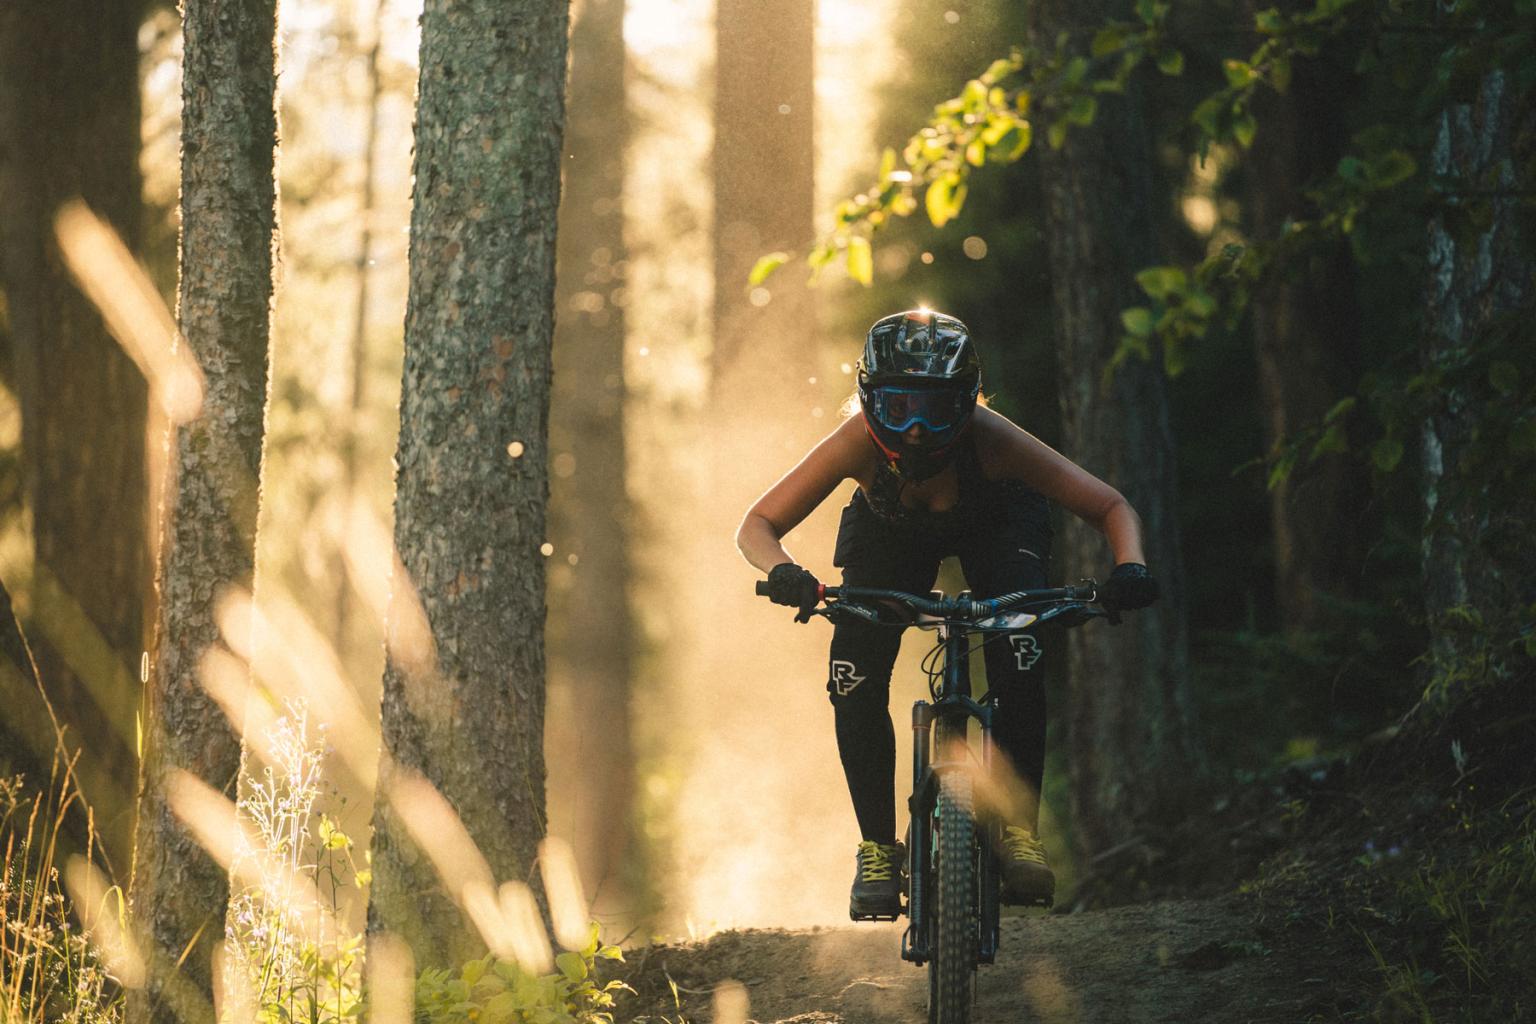 A girl downhill biking with sunlight beaming through the trees behind her